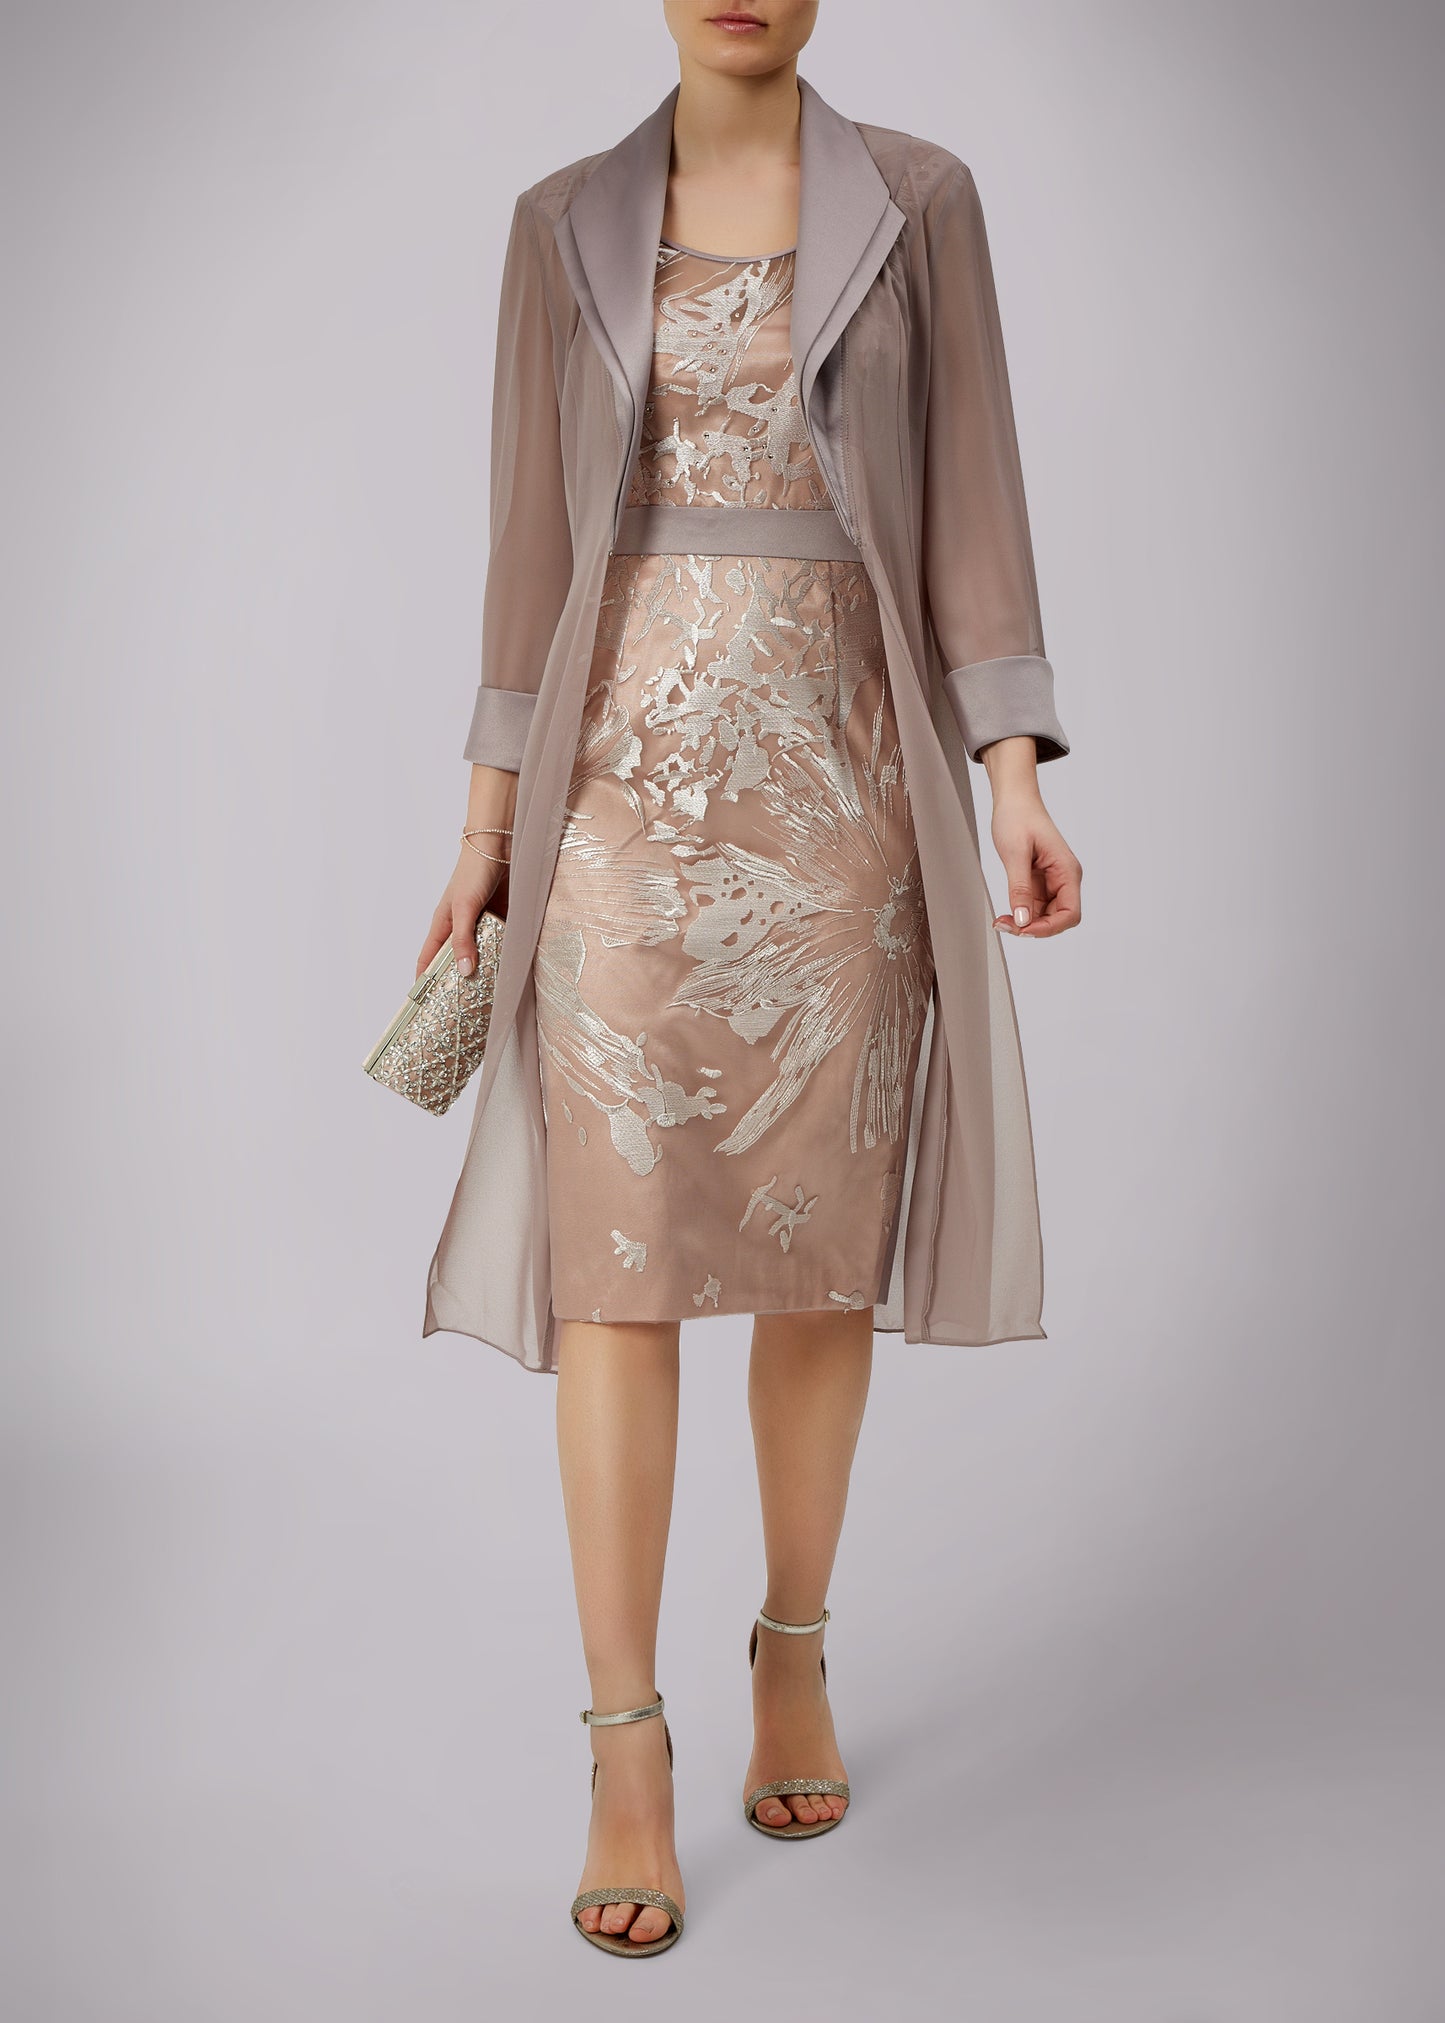 blush and taupe mother of the bride outfit